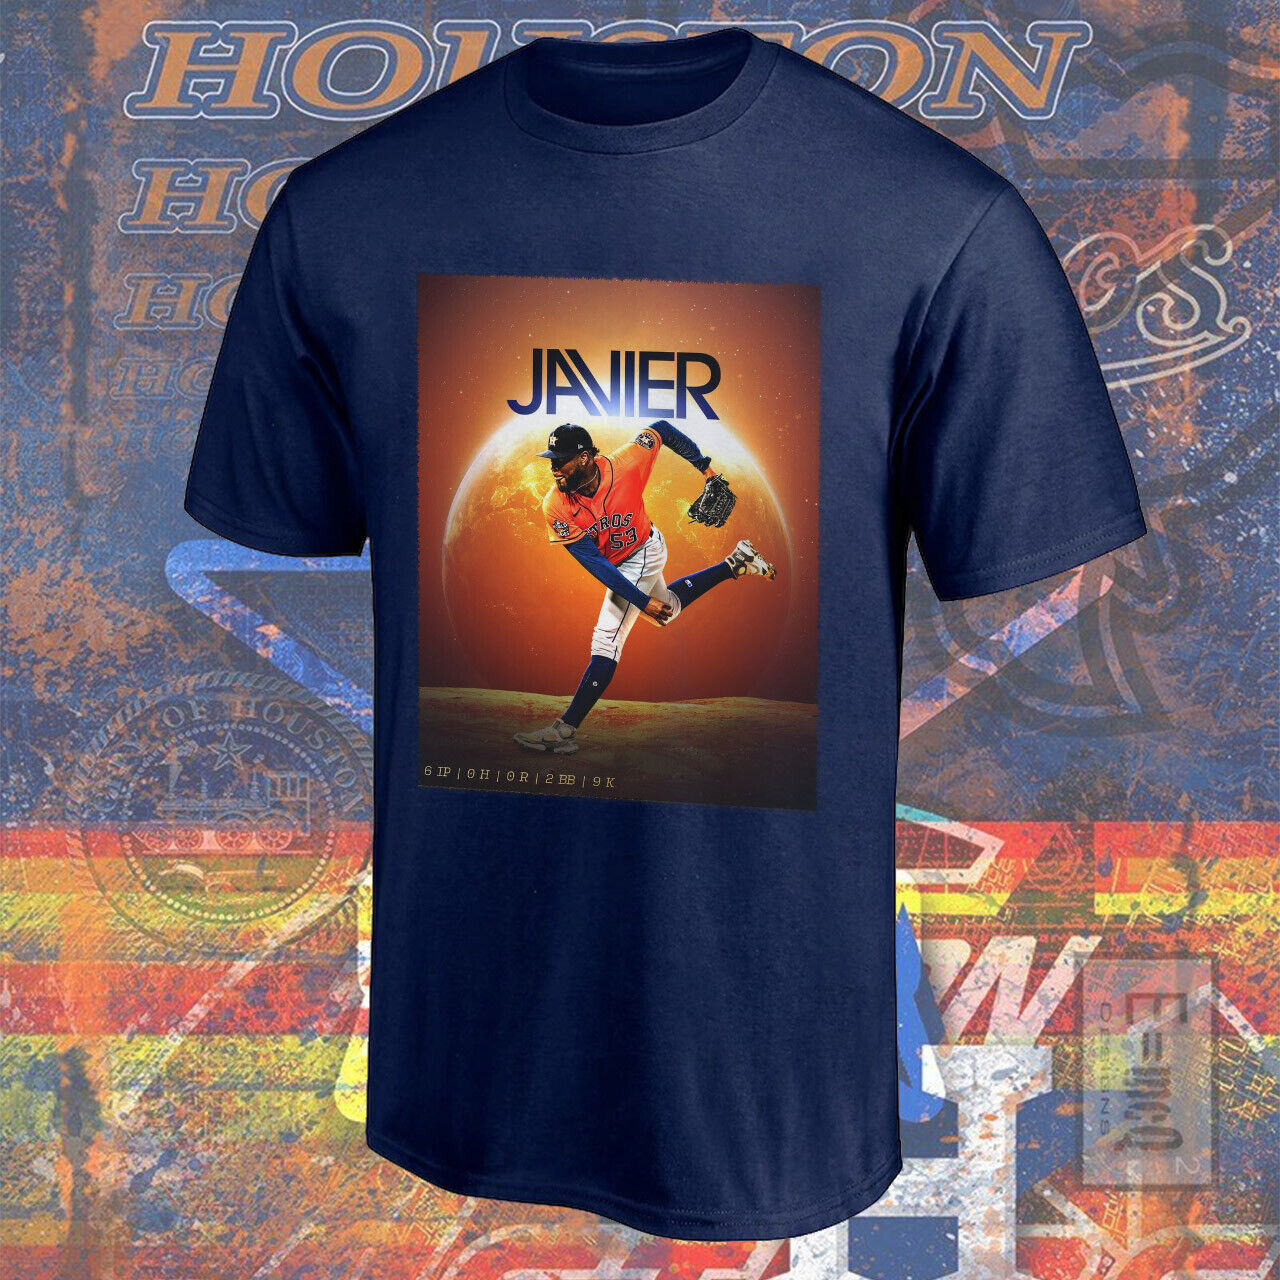 Cristian Javier 53 Houston Astros Baseball Player T-shirt S-5xl2 Full Size Up To 5xl